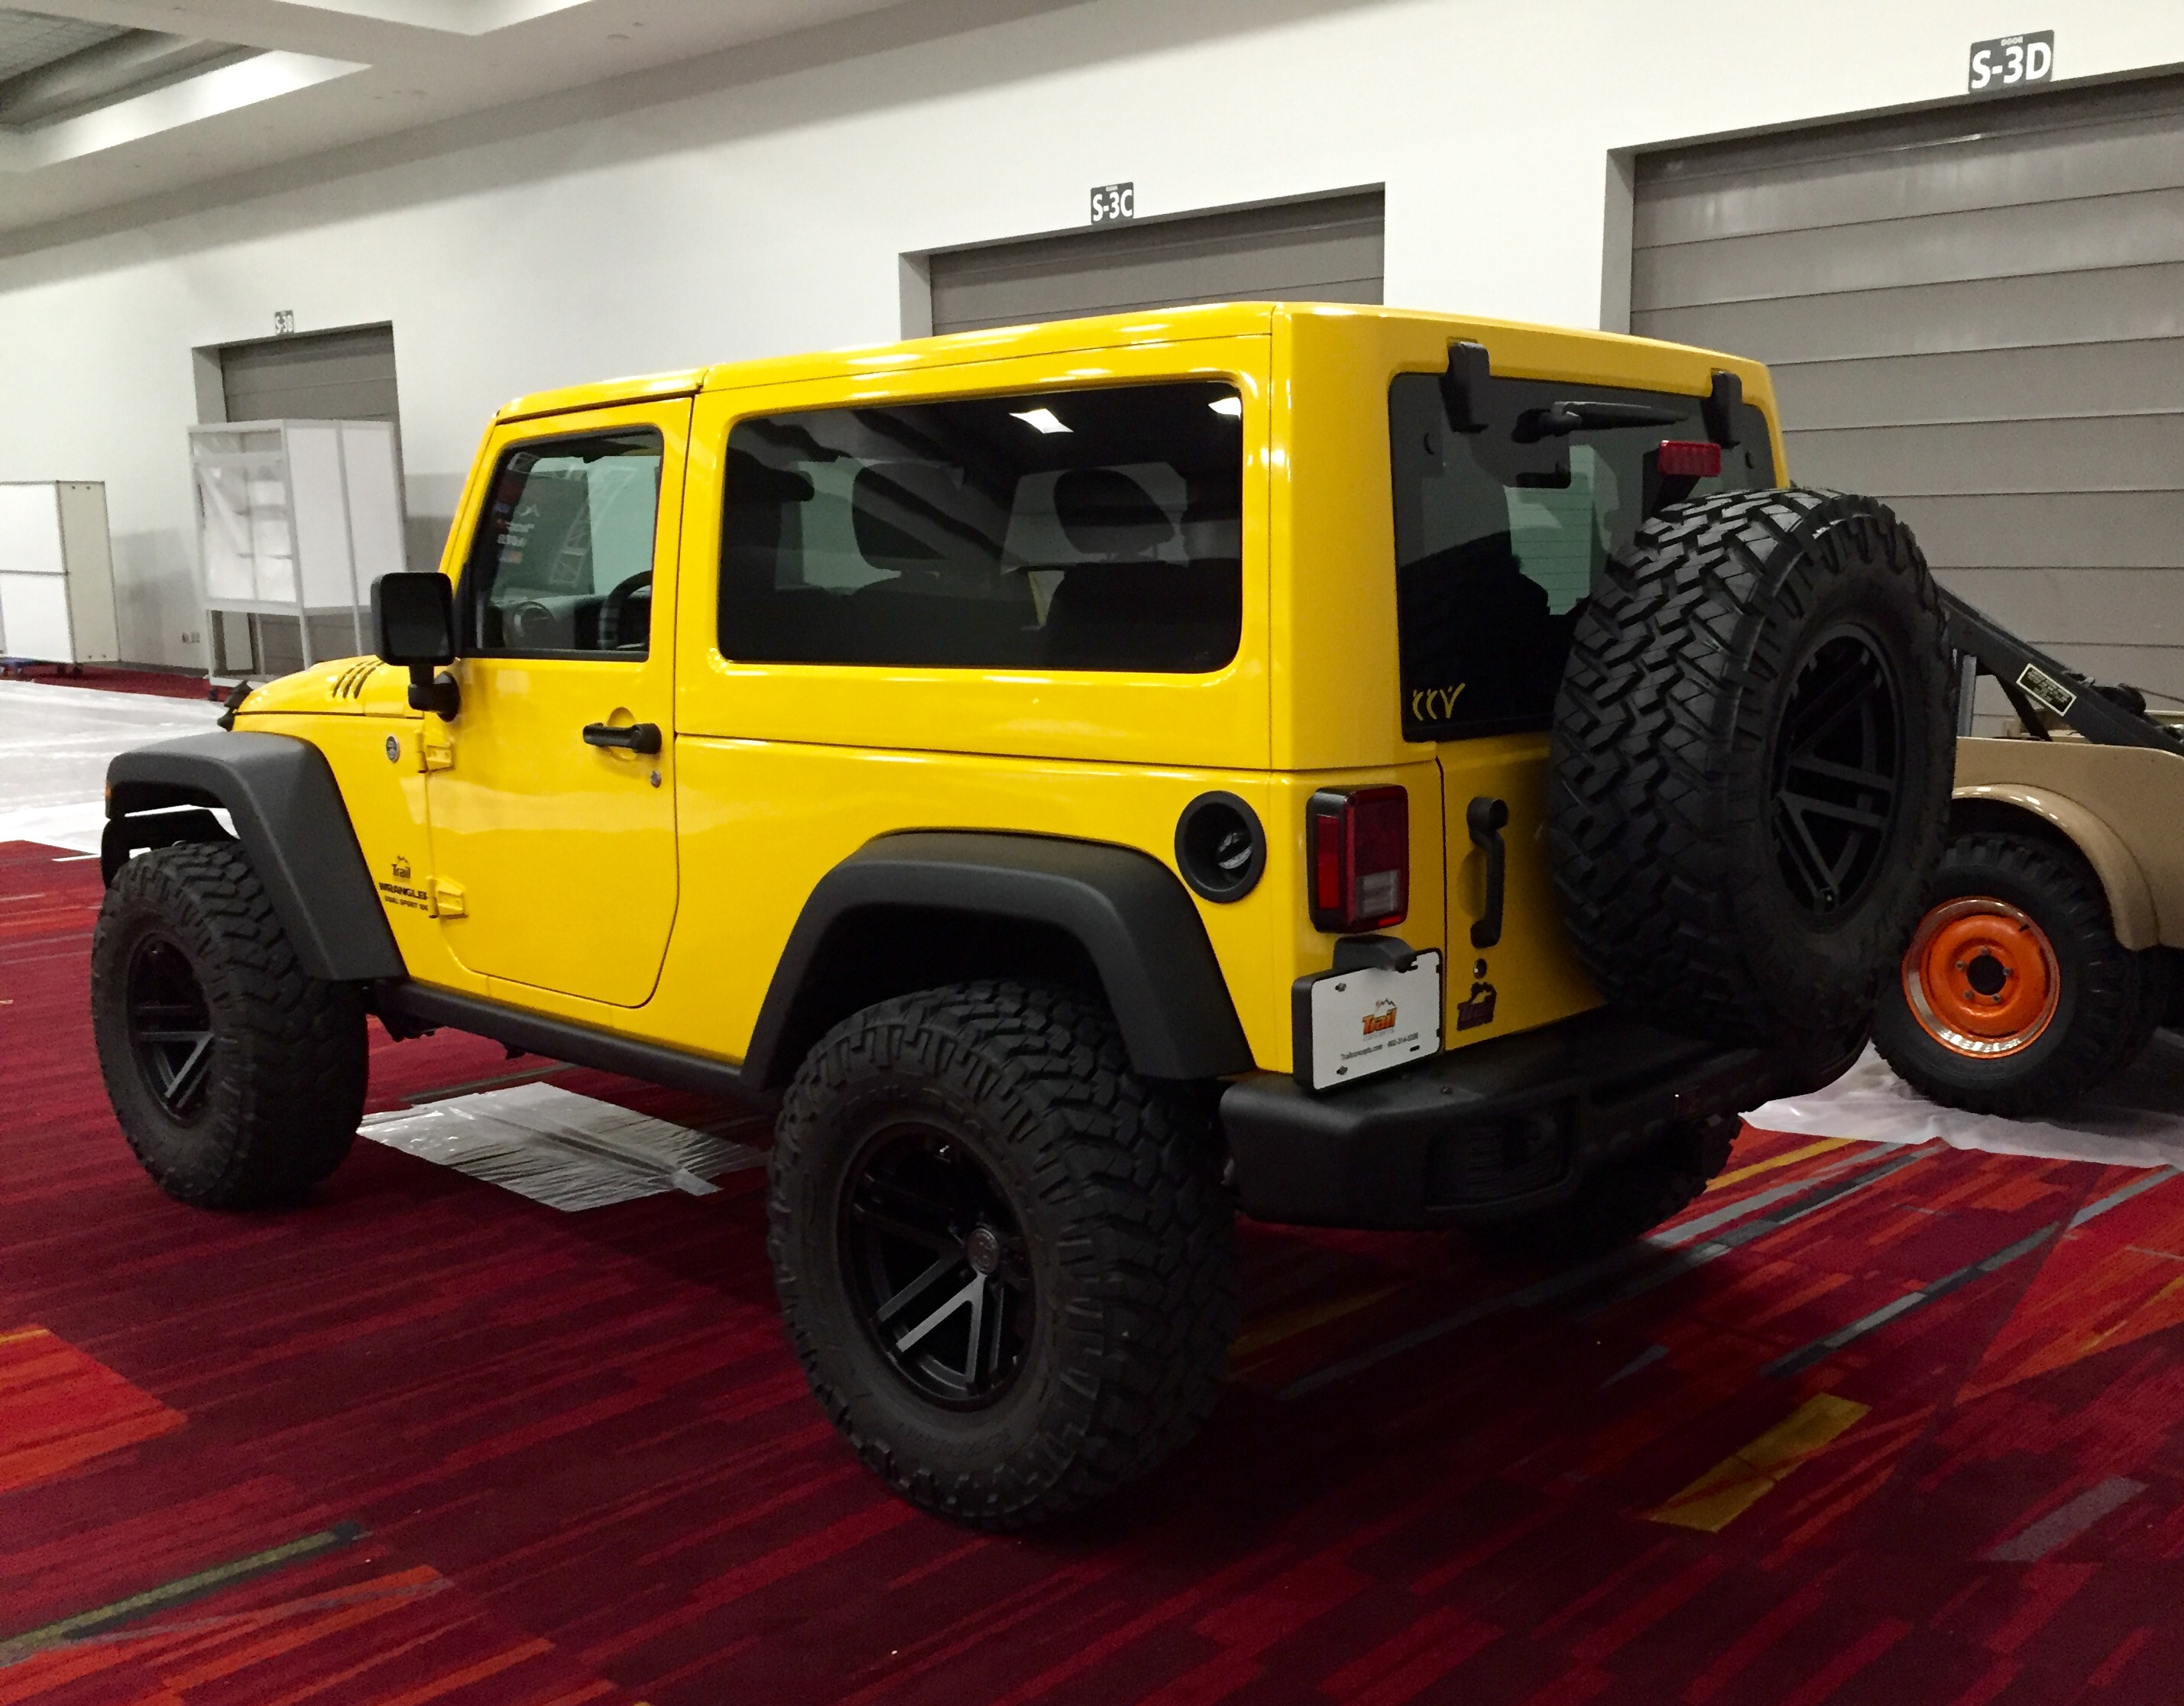 Aftermarket Supplier To Reveal Long-Wheelbase Stretched Jeep Wrangler  Concept At SEMA 2015